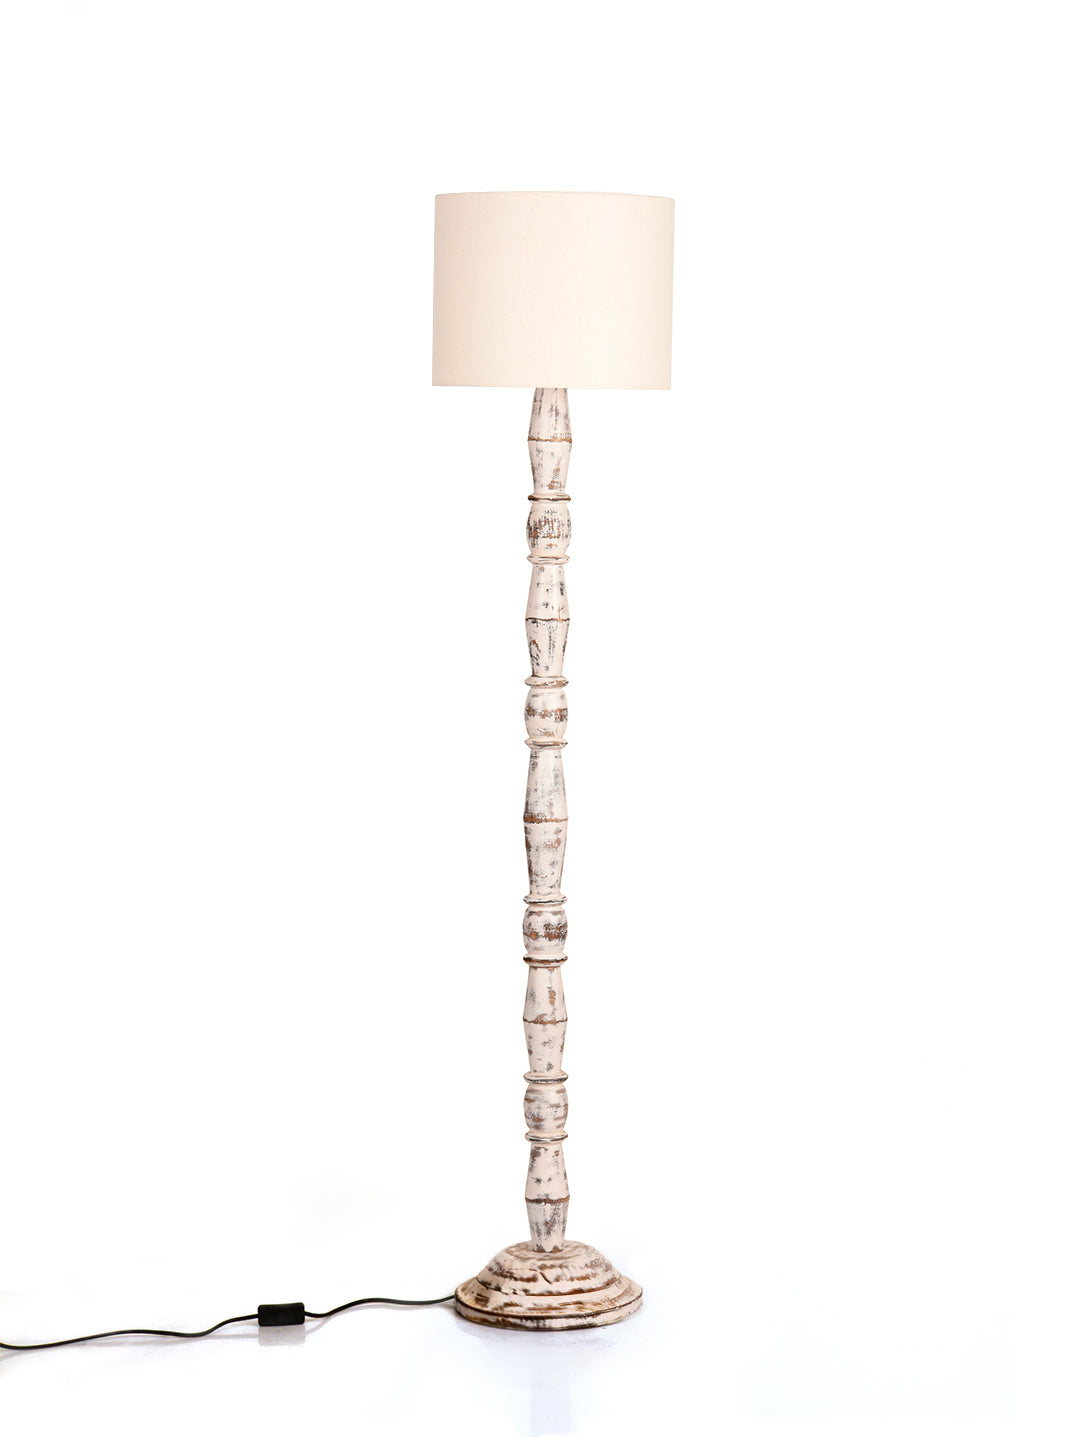 Distress White Floor Lamp with Brown Jute Shade